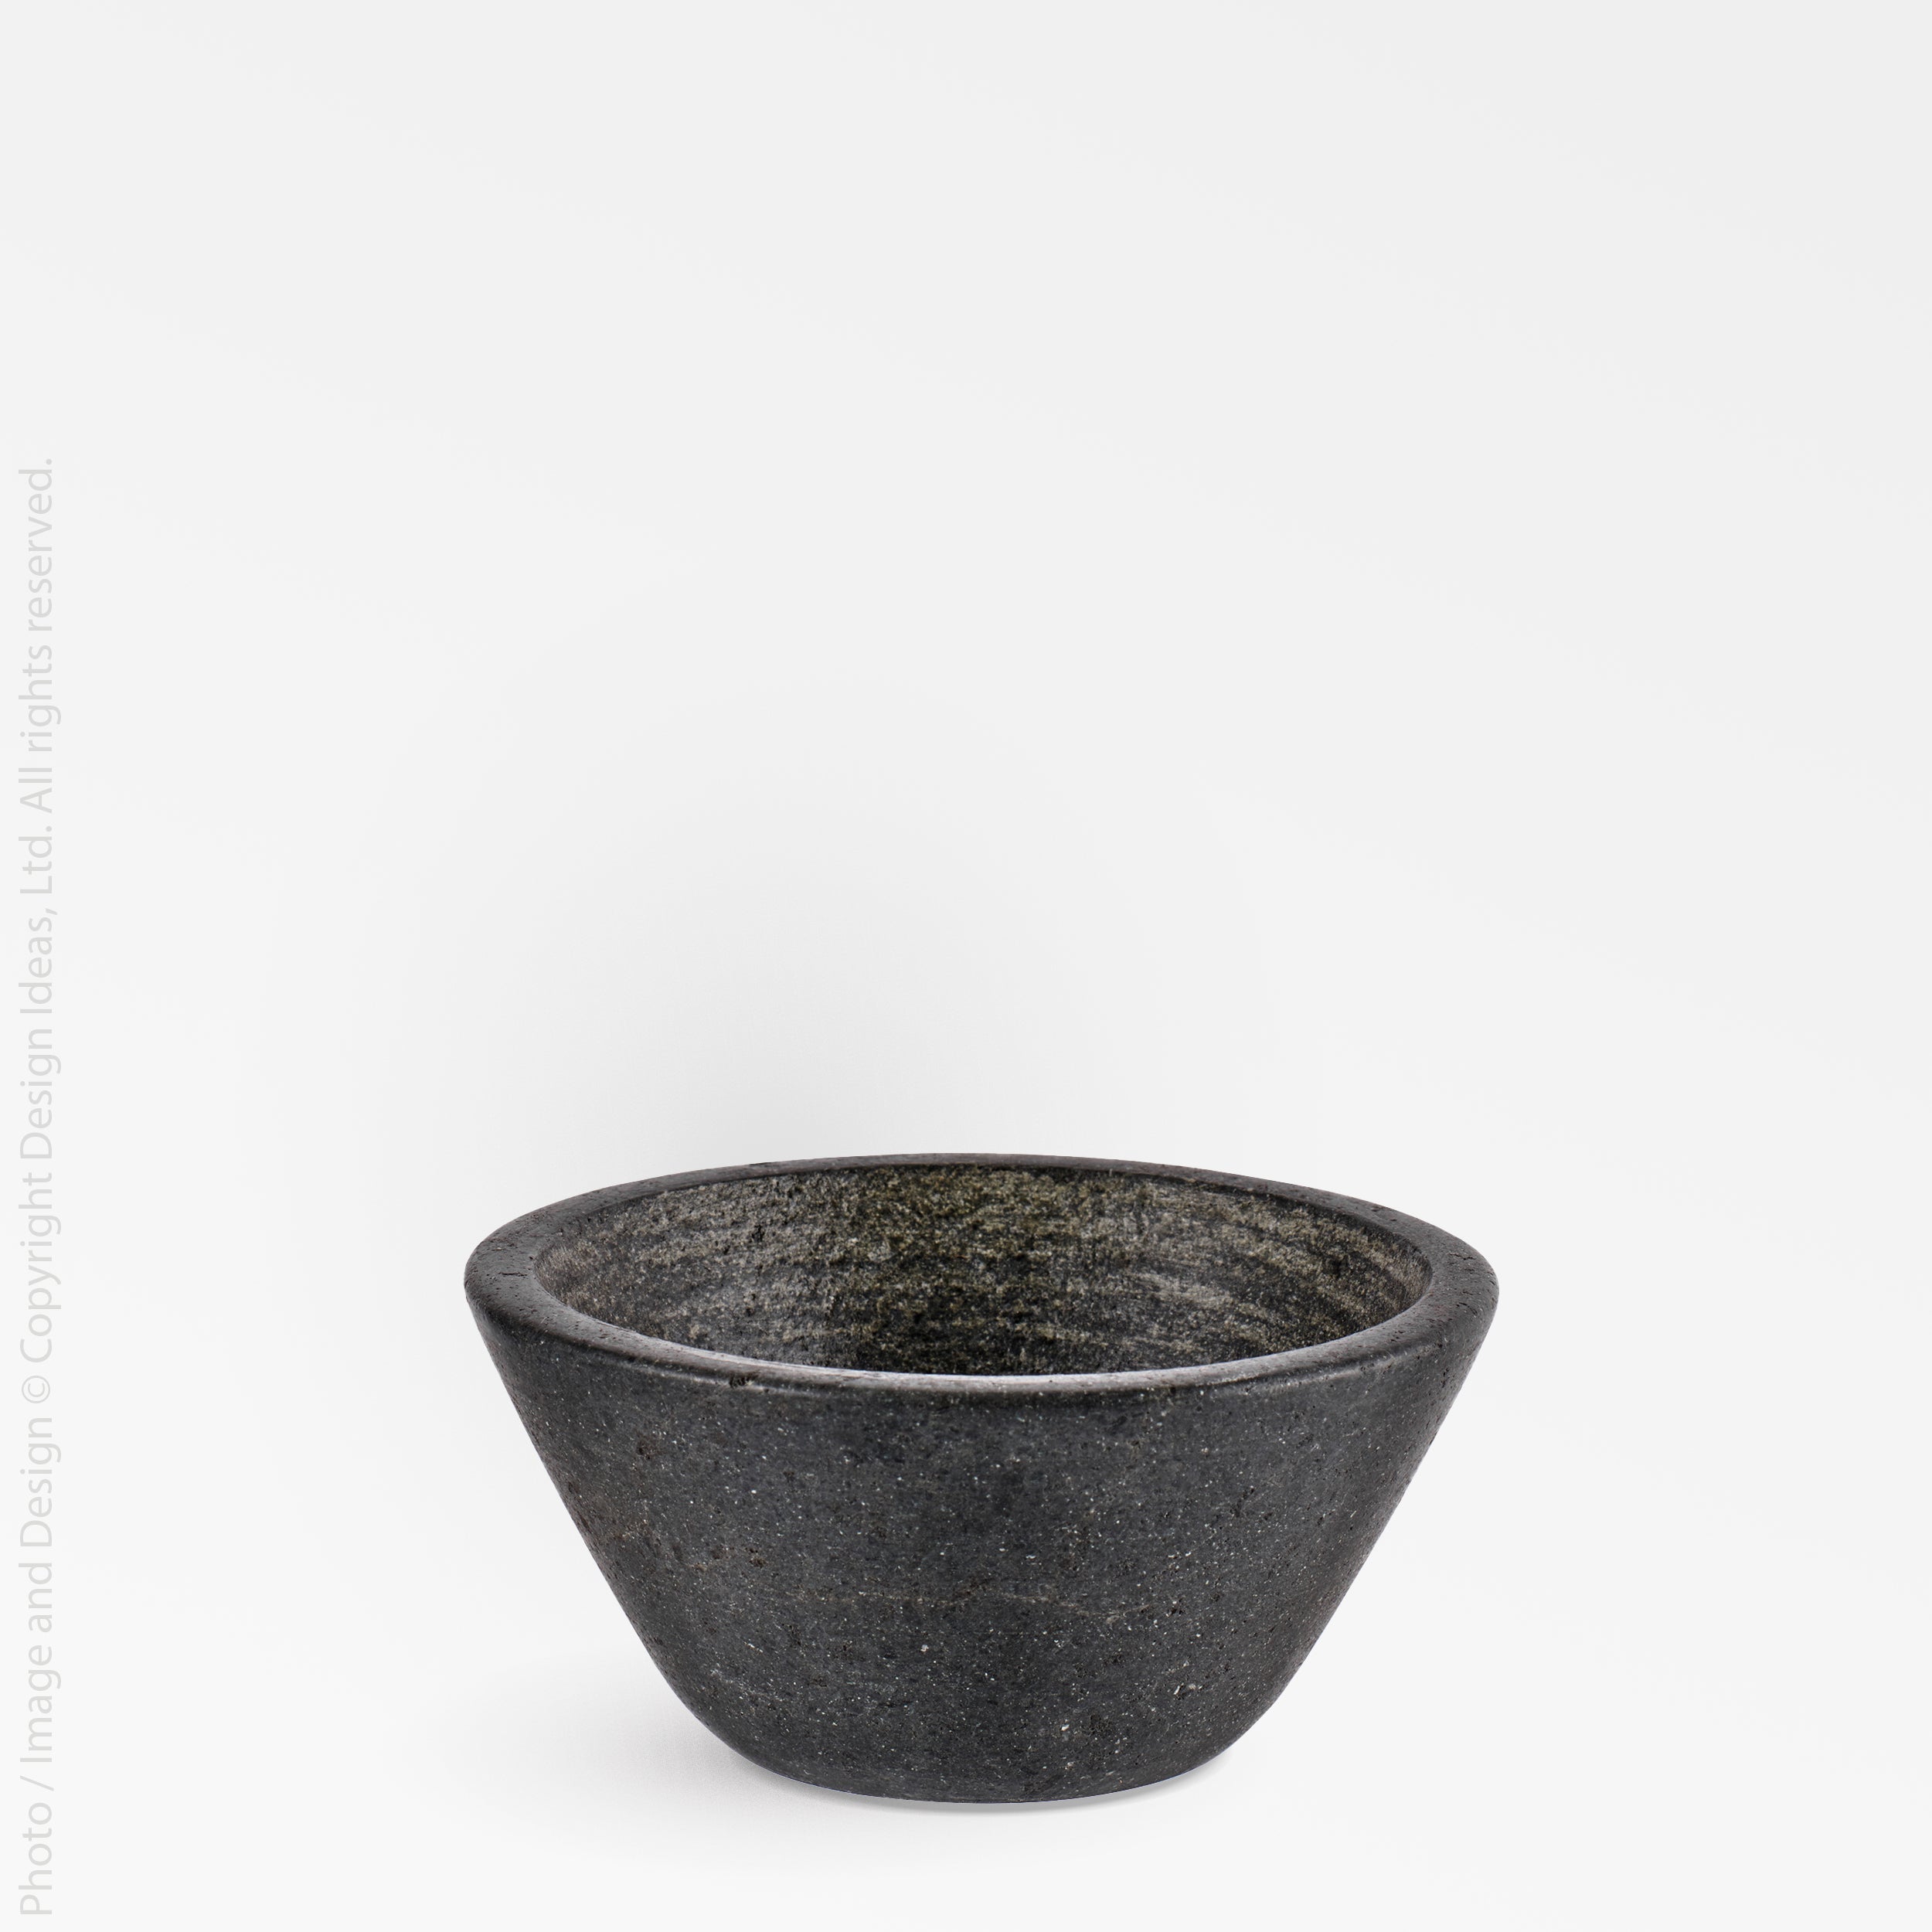 Hasten™ stone pot (4.3 dia x 1.9) - Black | Image 1 | Premium Pot from the Hasten collection | made with Andesite Stone for long lasting use | texxture